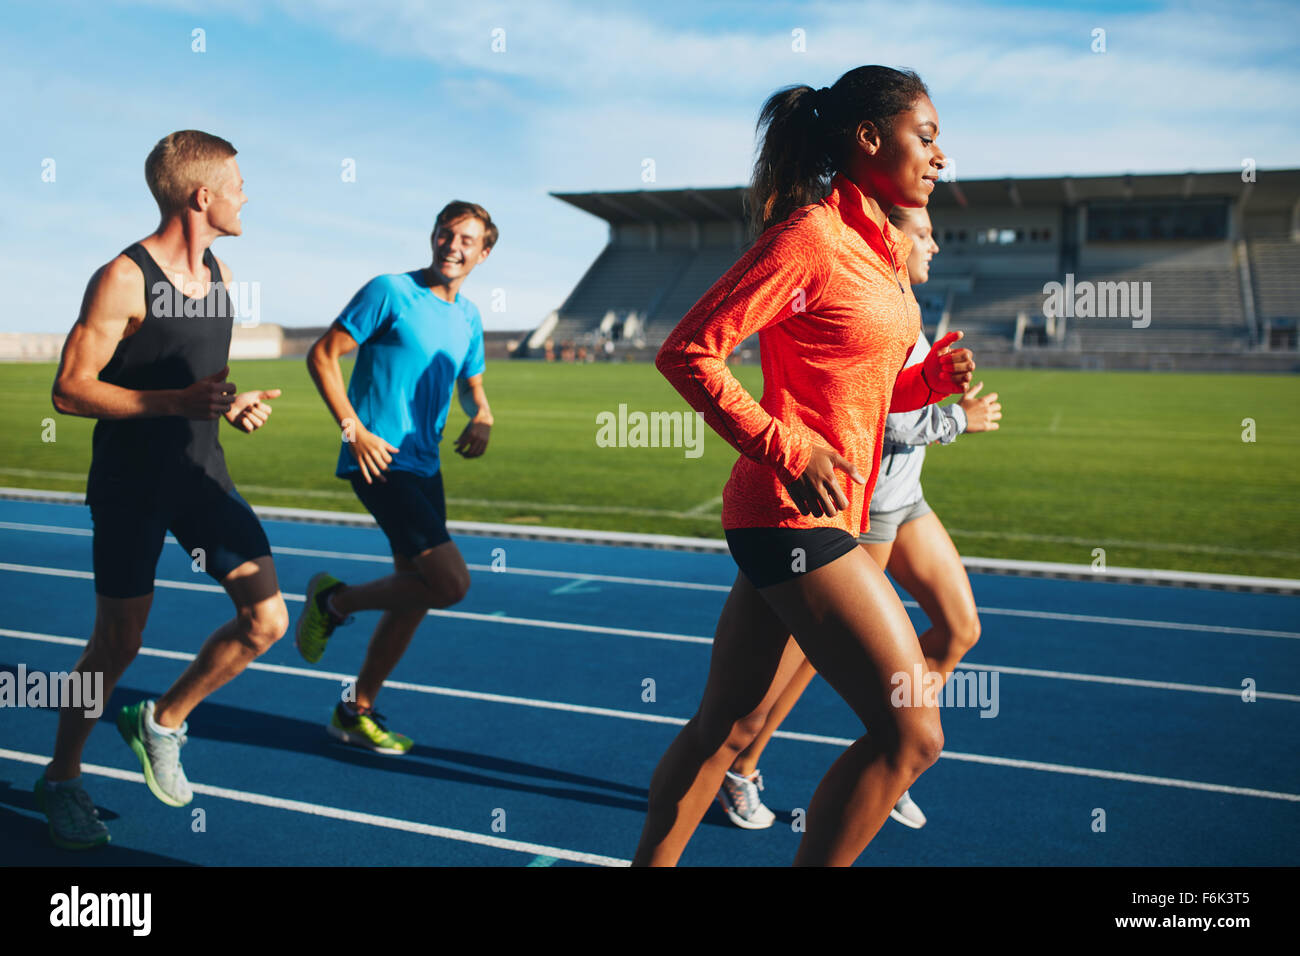 Fit men and women running on a race track. Multiracial athletes practicing on race track in stadium. Stock Photo